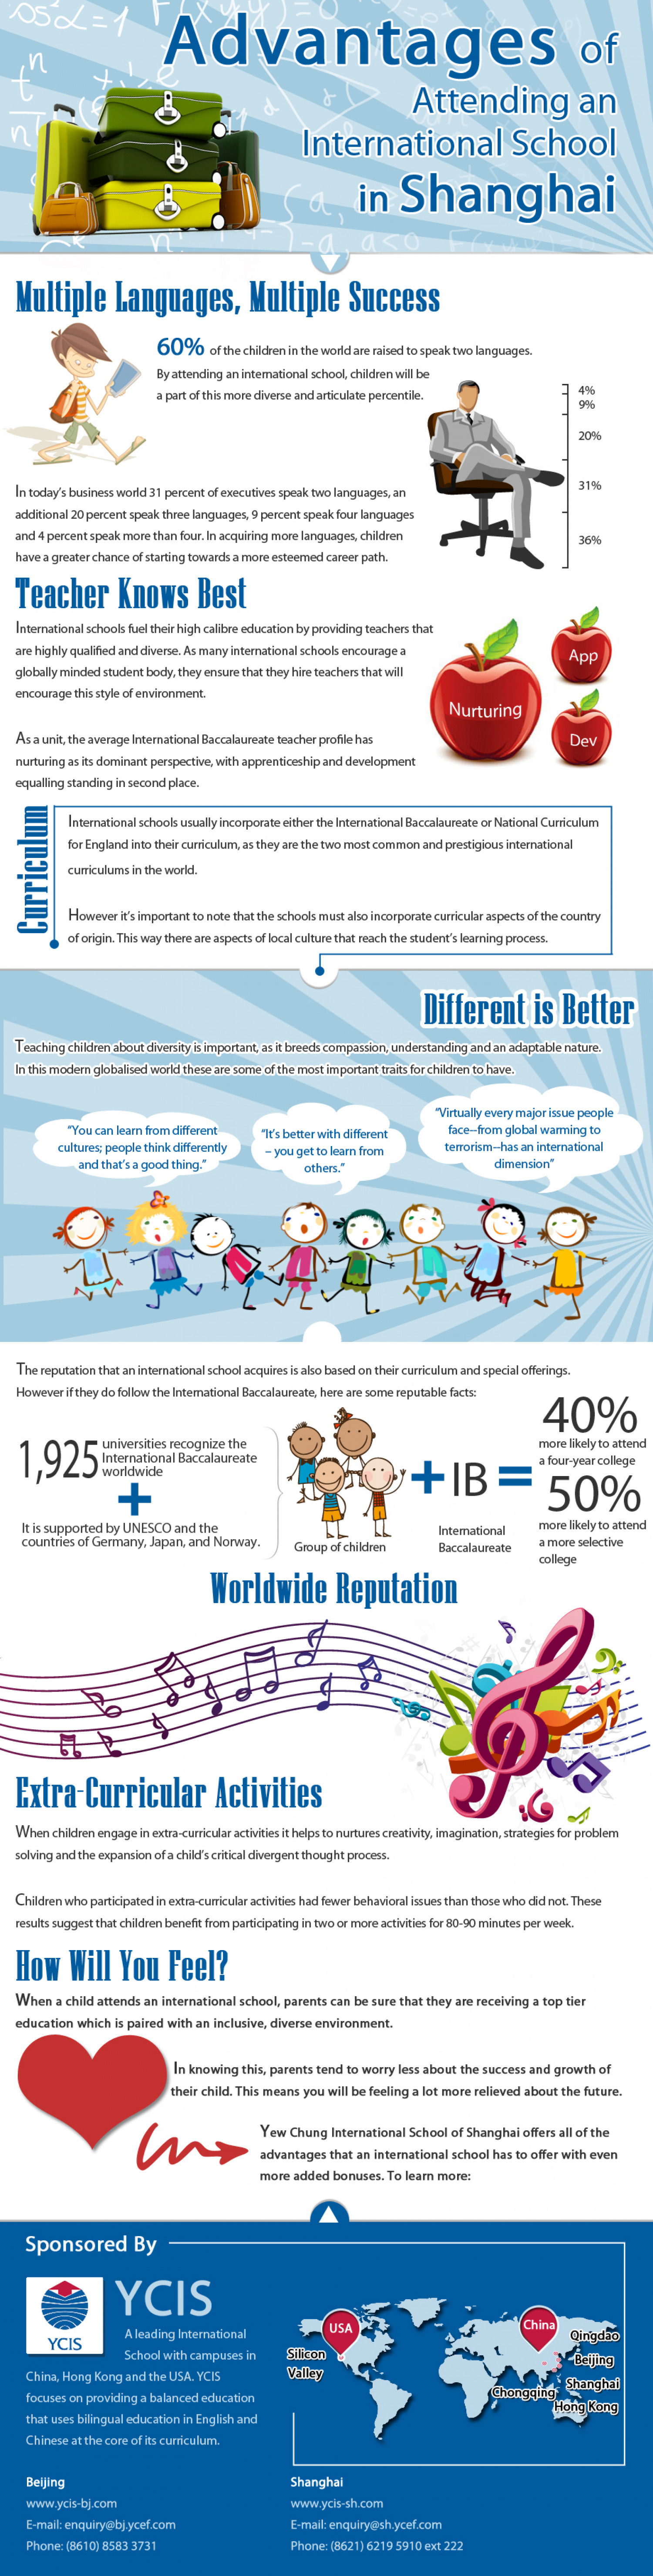 Advantages of Attending an International School in Shanghai Infographic